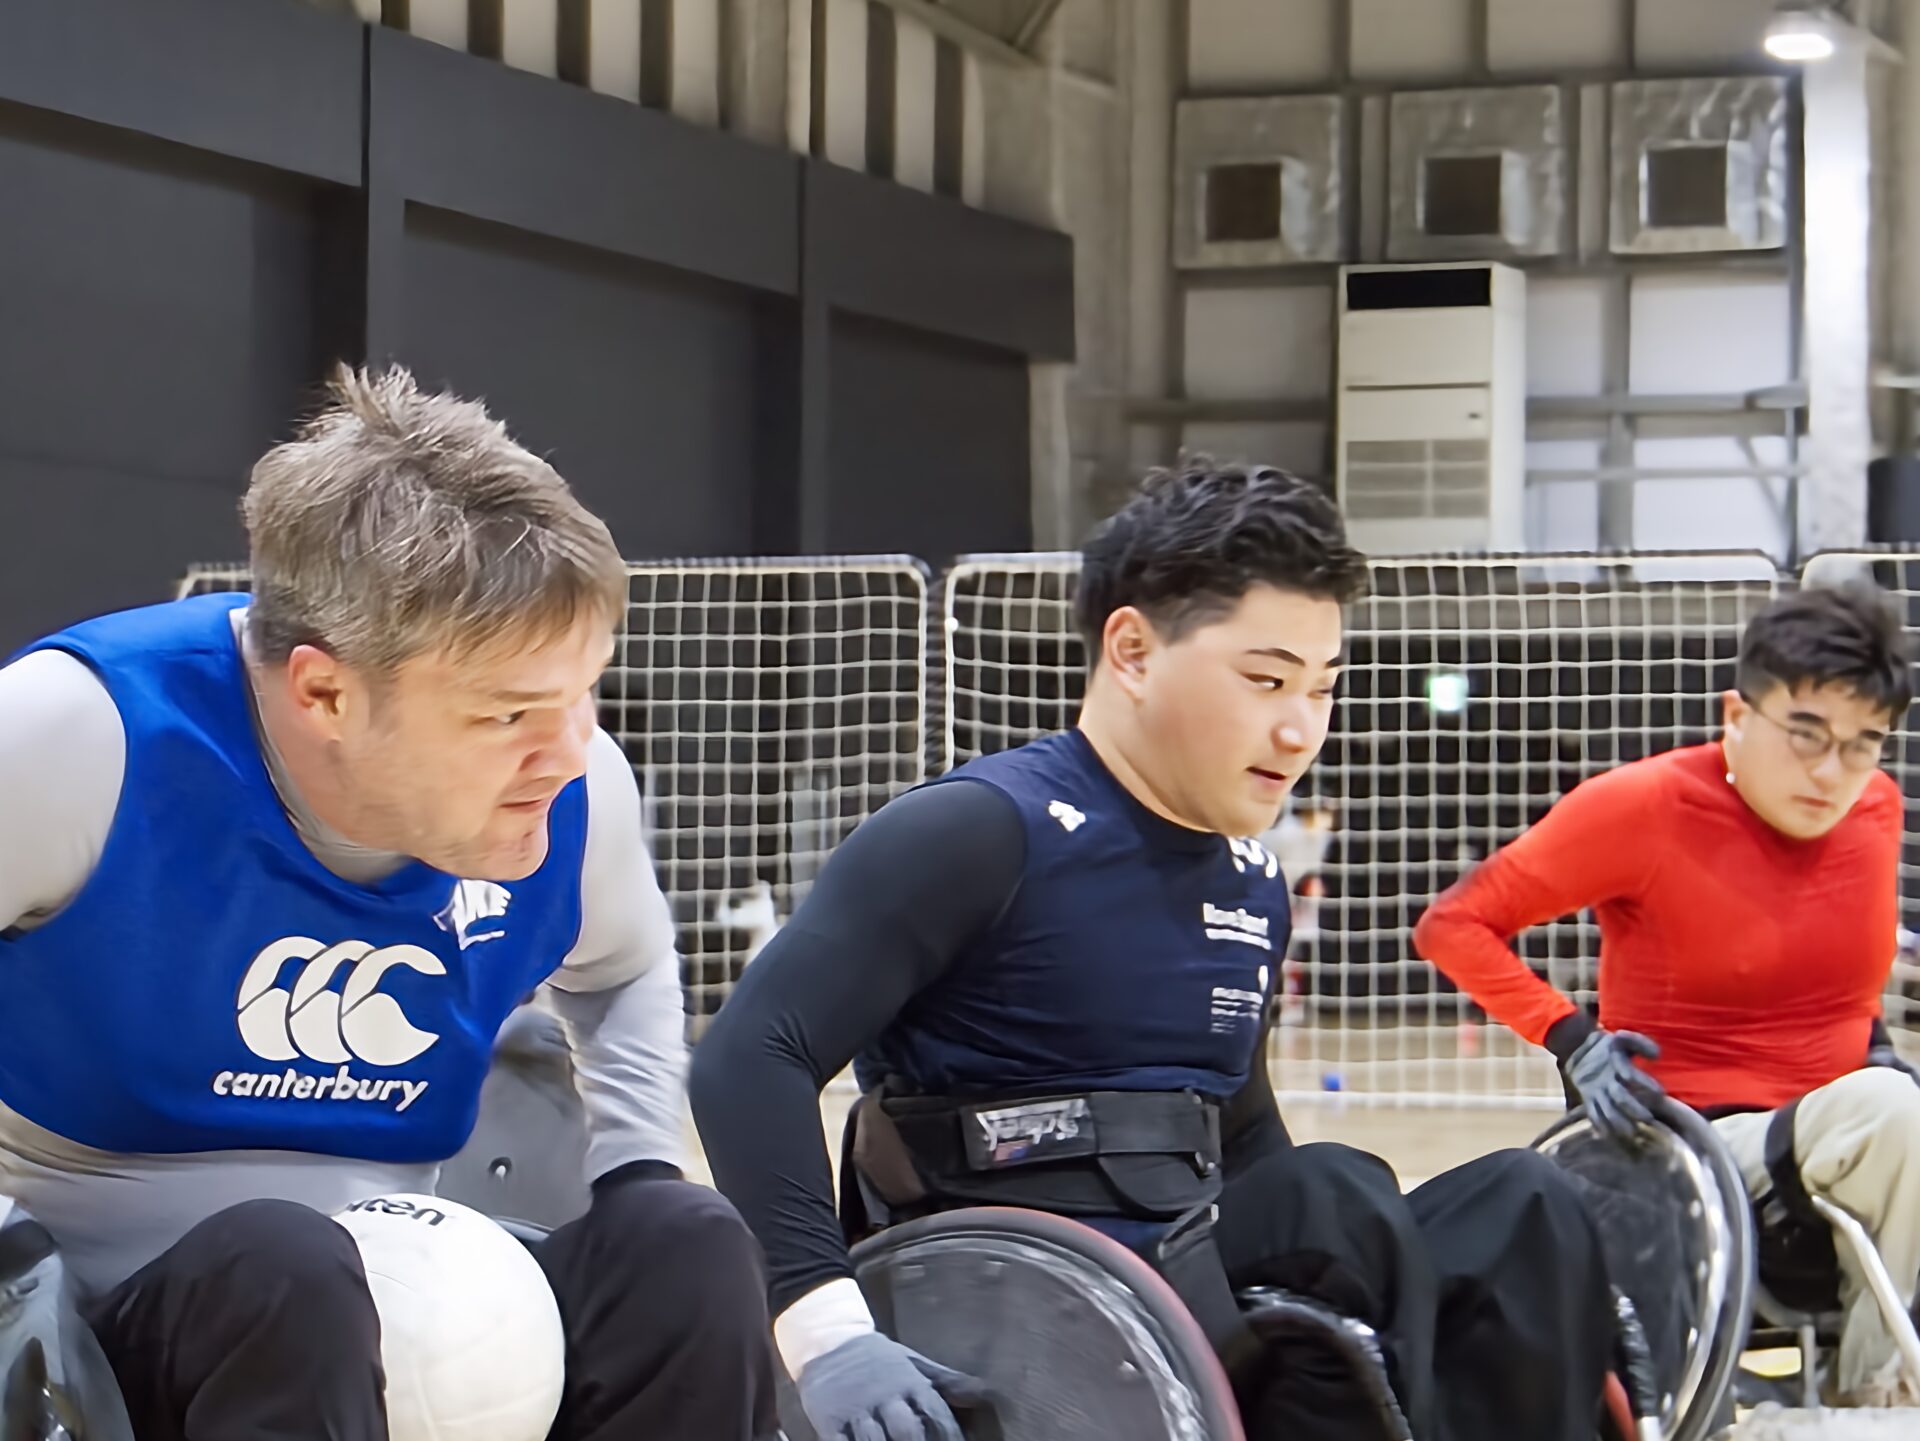 Wheelchair Rugby リオ選手とニック選手の親子マッチ(AXE)-Journal-ONE撮影